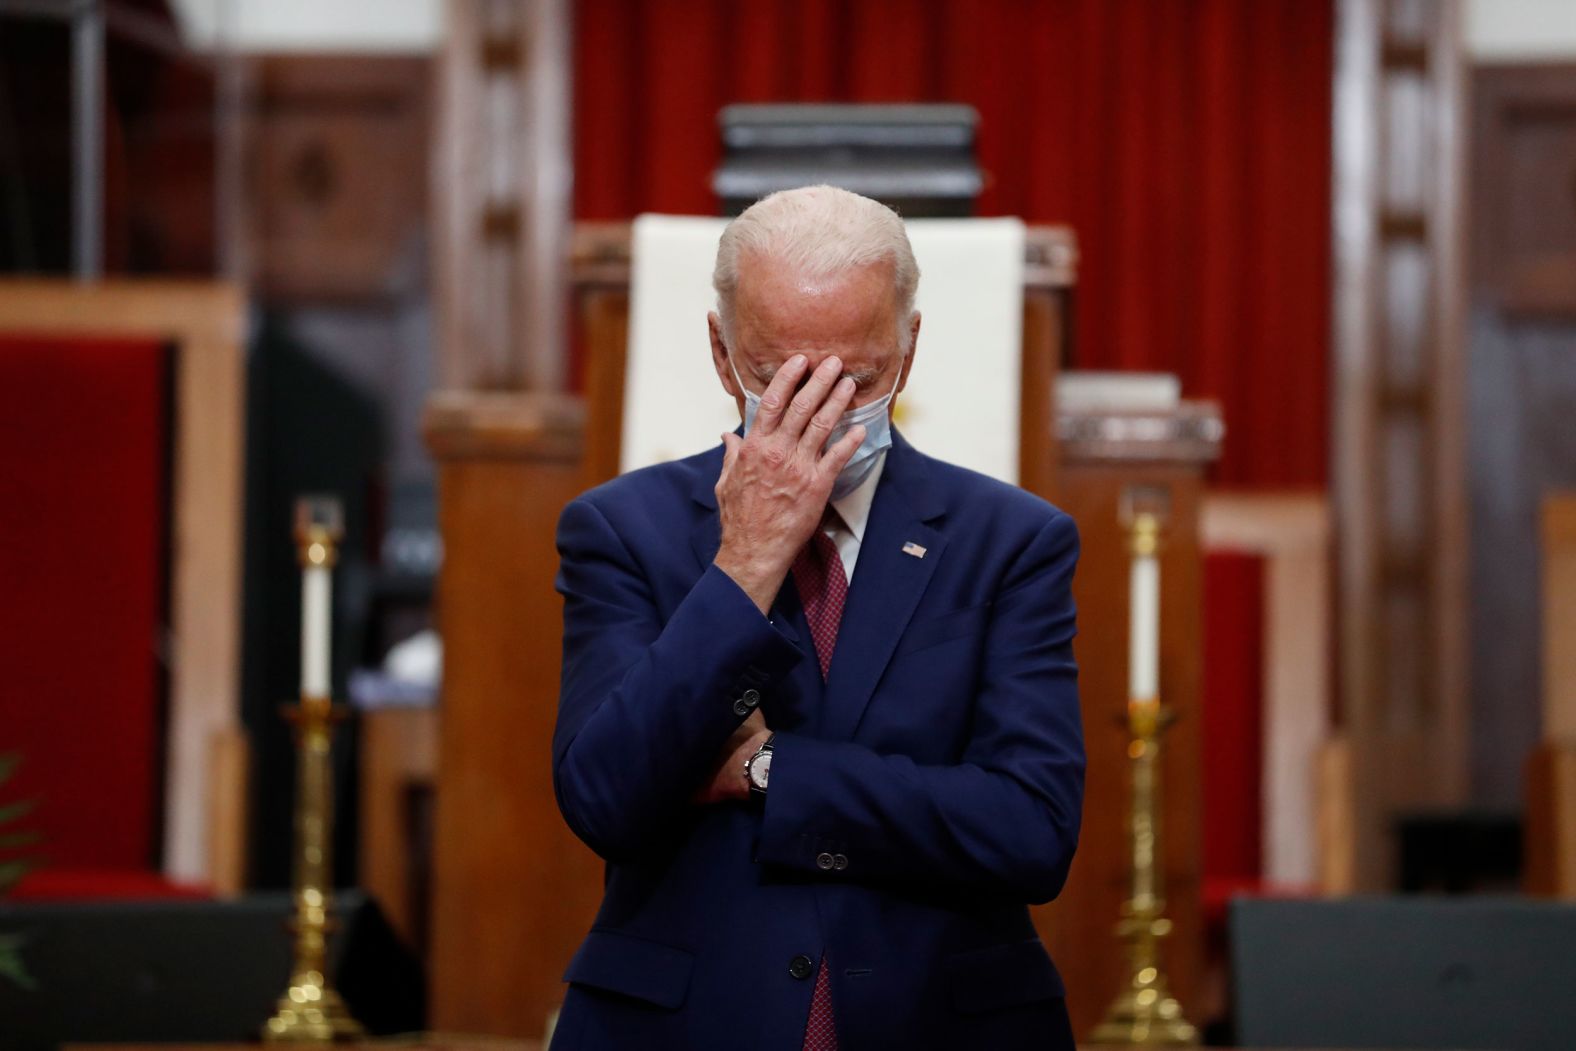 Biden touches his face while speaking at a church in Wilmington, Delaware, in June 2020. As he spoke with African-American leaders, Biden <a href="index.php?page=&url=https%3A%2F%2Fwww.cnn.com%2F2020%2F06%2F01%2Fpolitics%2Fjoe-biden-institutional-racism-wilmington%2Findex.html" target="_blank">pledged to take steps</a> to combat institutional racism and re-establish a police oversight body at the Justice Department.